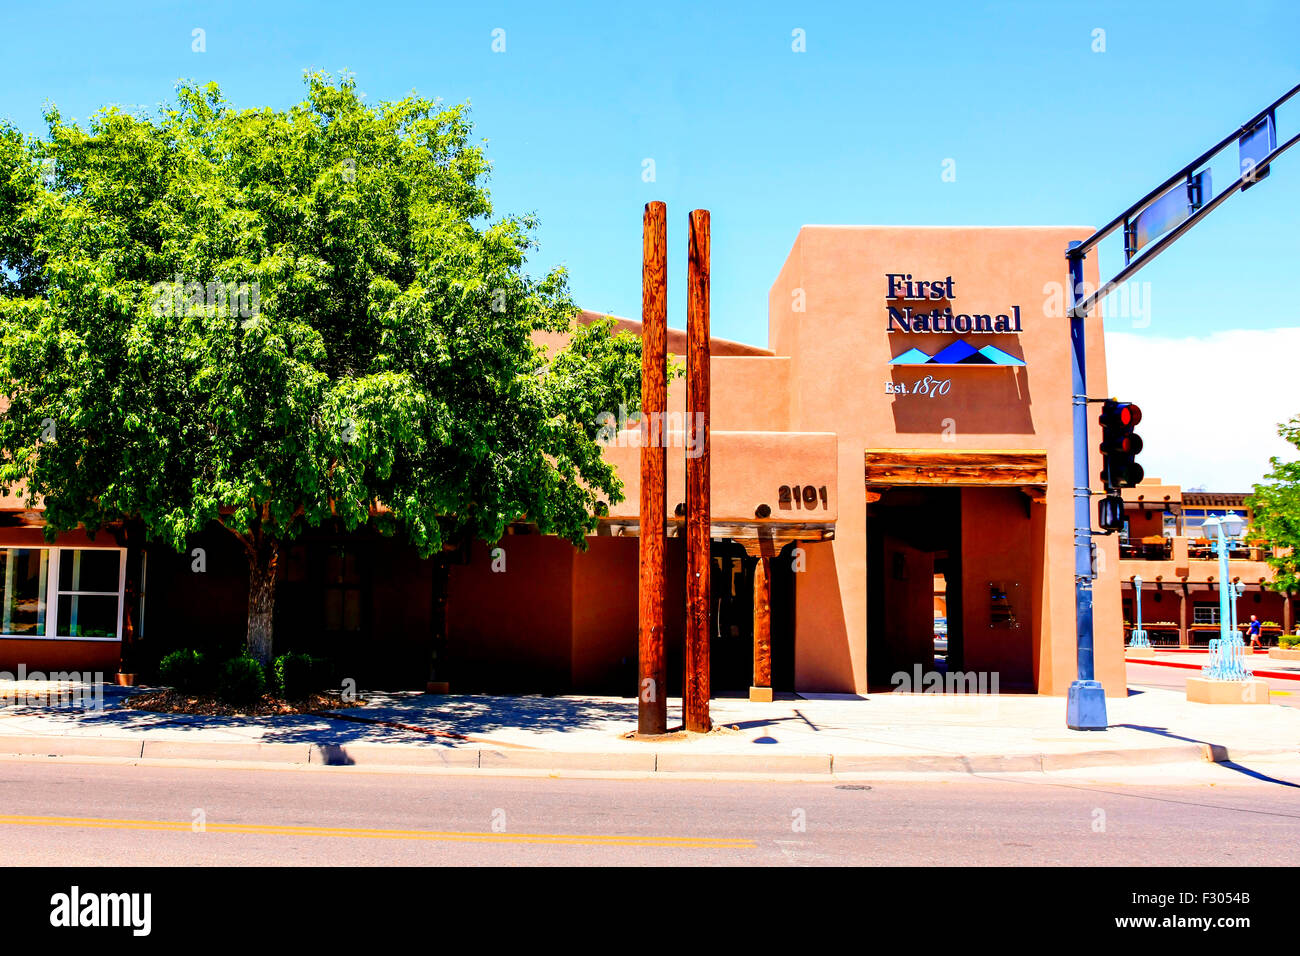 First National Bank building in Albuquerque, New Mexico Stock Photo